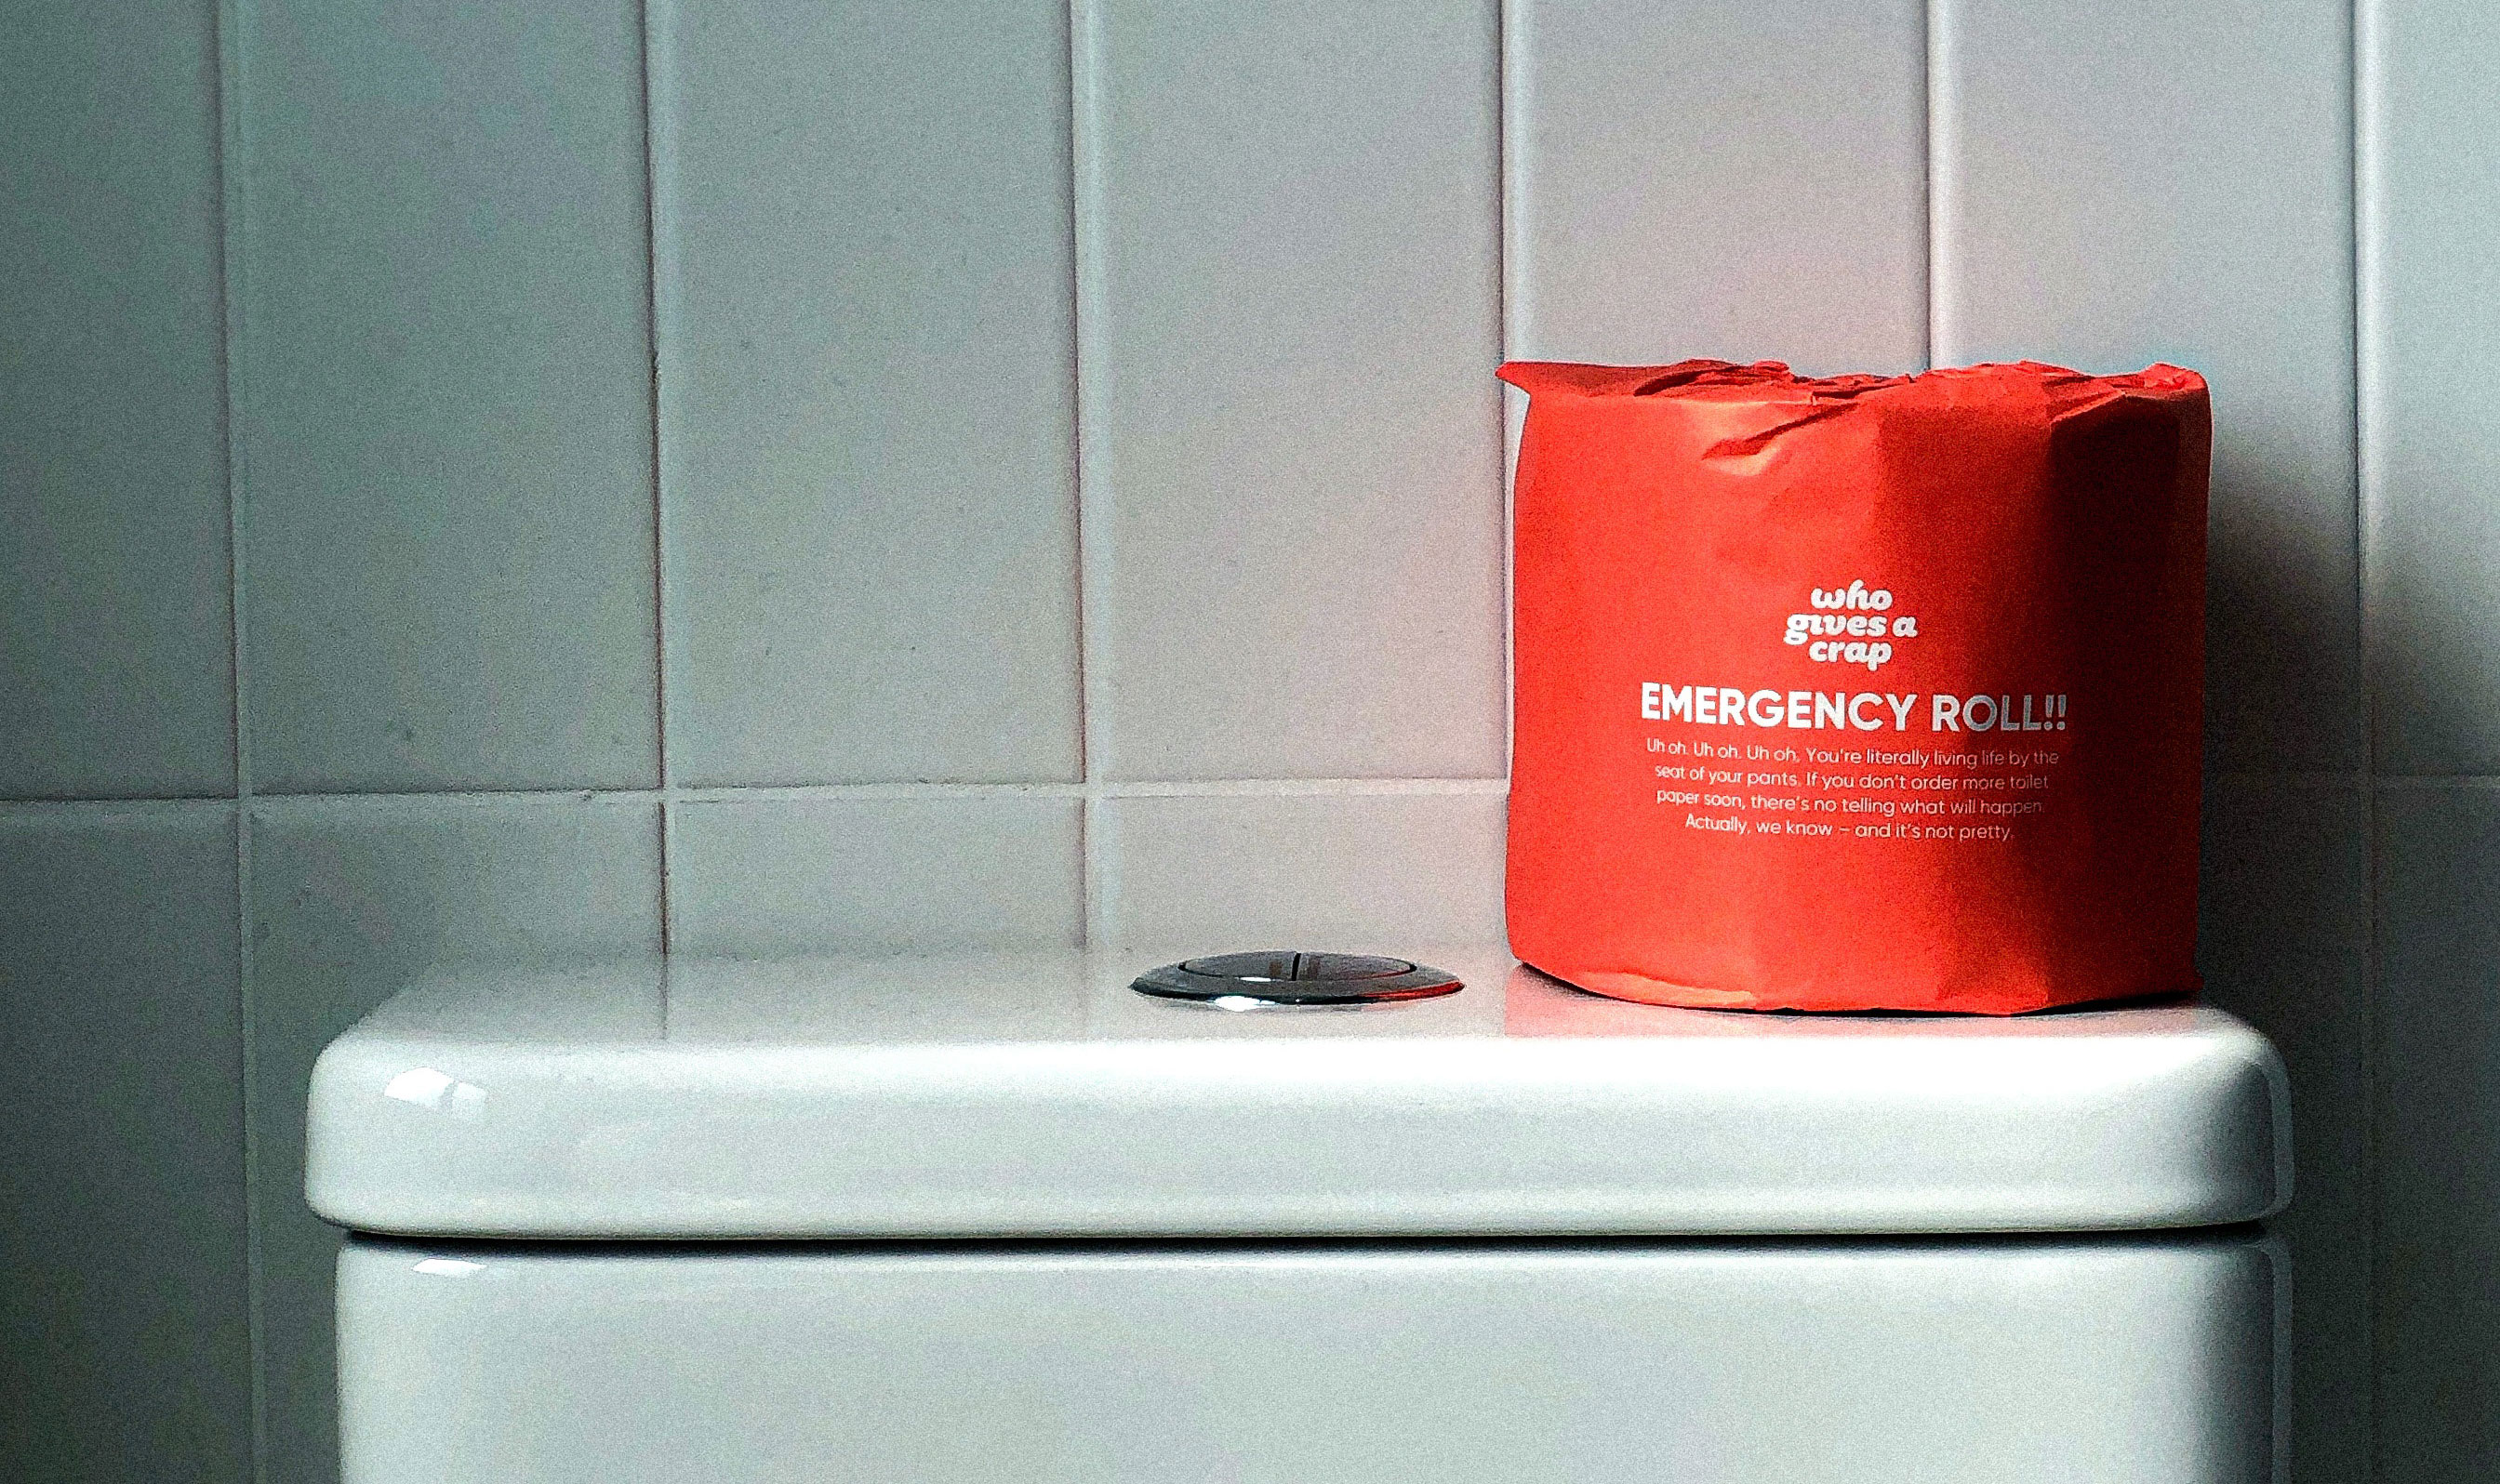 A roll of red toilet paper is placed on top of the toilet tank, indicating ease of defecation and relief from constipation.